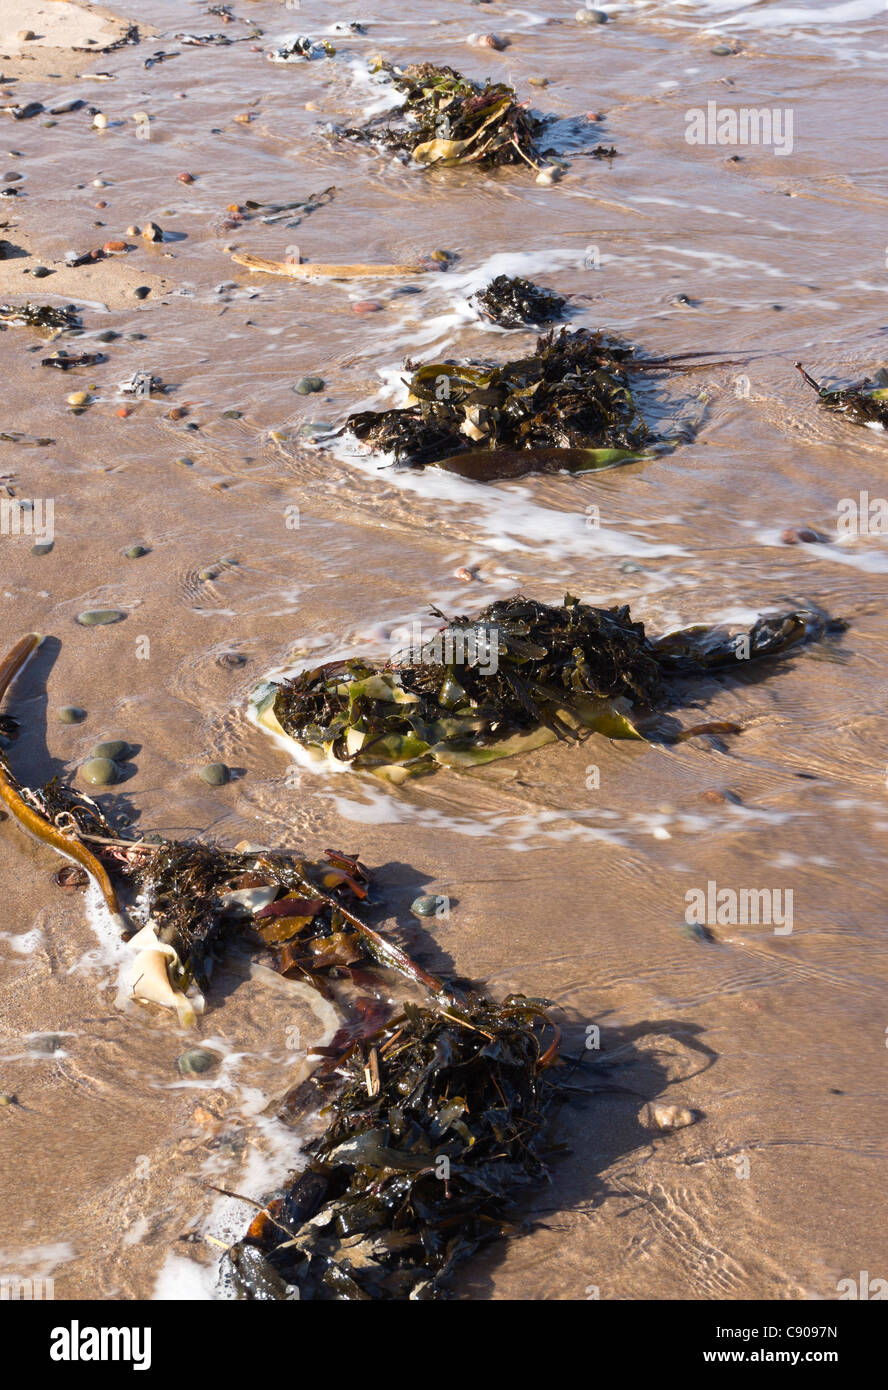 Northumberland - Spittal beach, south of Berwick on Tweed, seaside town. Washed up seaweed on the tide. Stock Photo